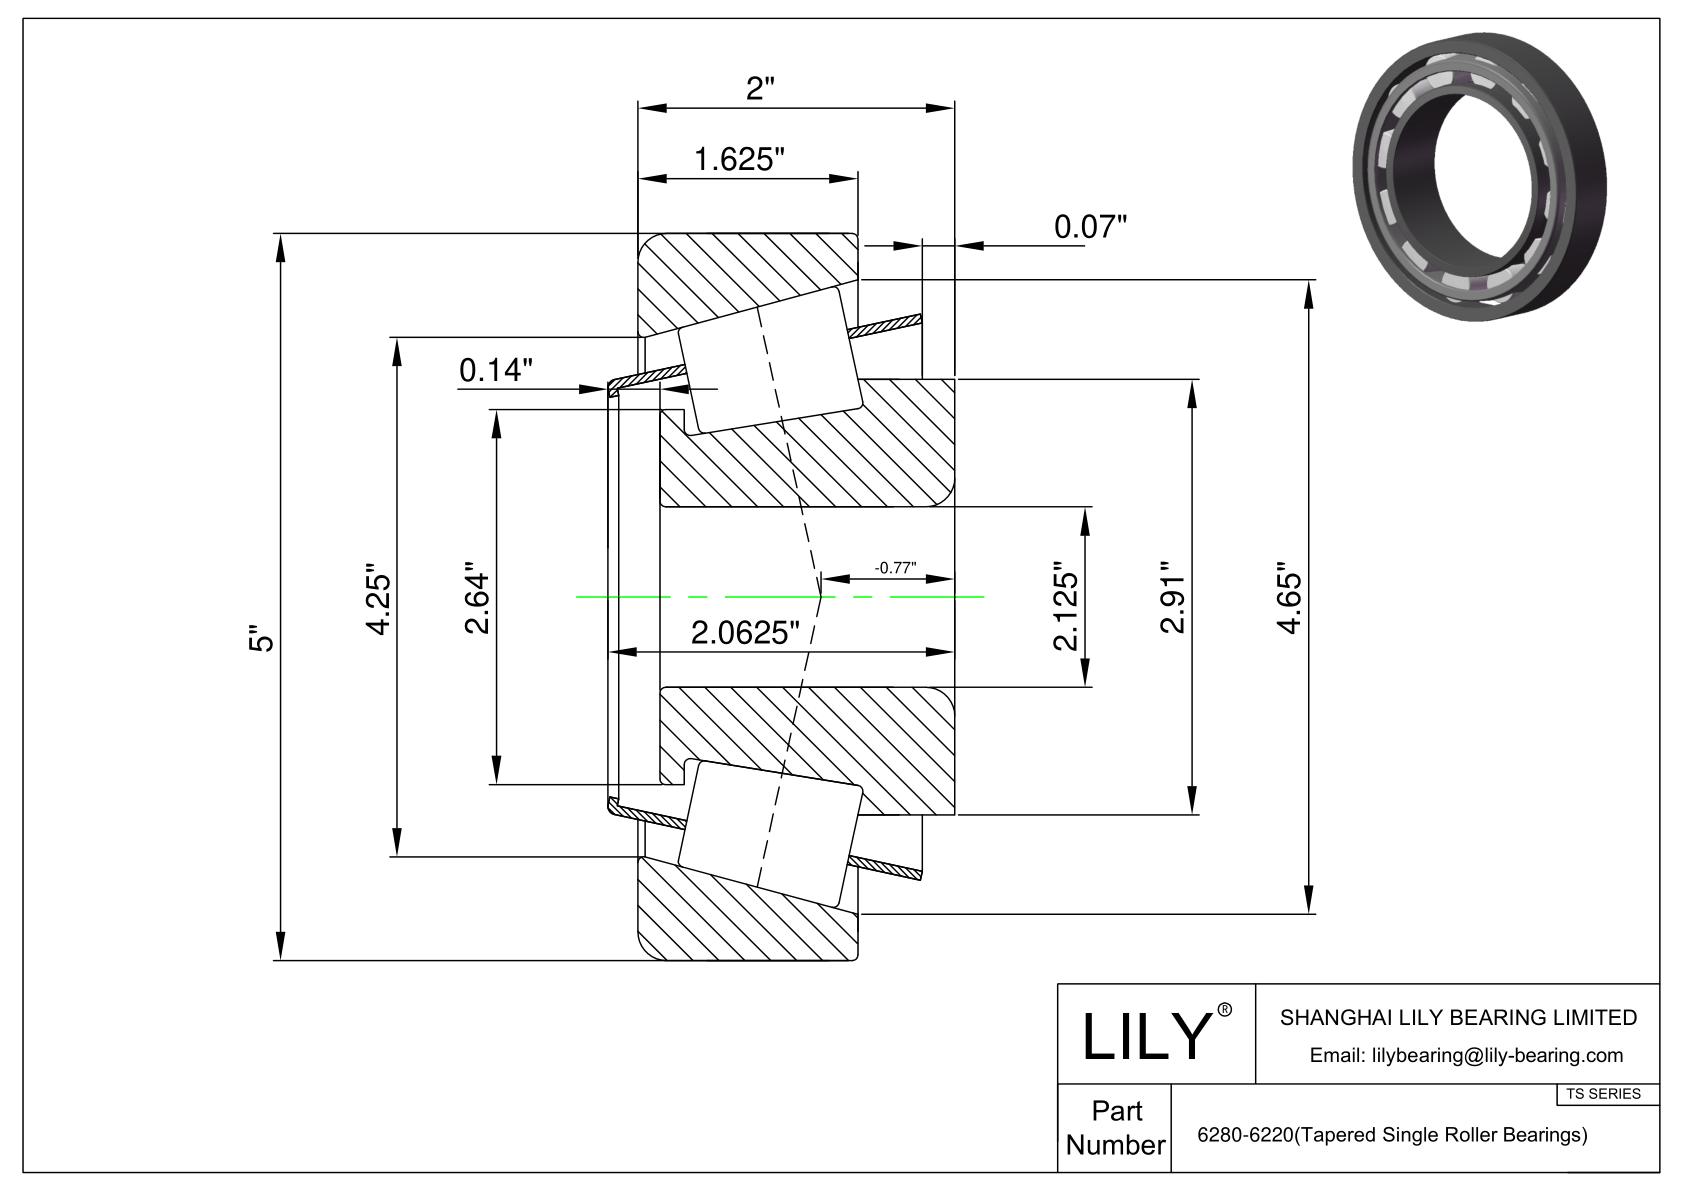 6280-6220 TS (Tapered Single Roller Bearings) (Imperial) cad drawing